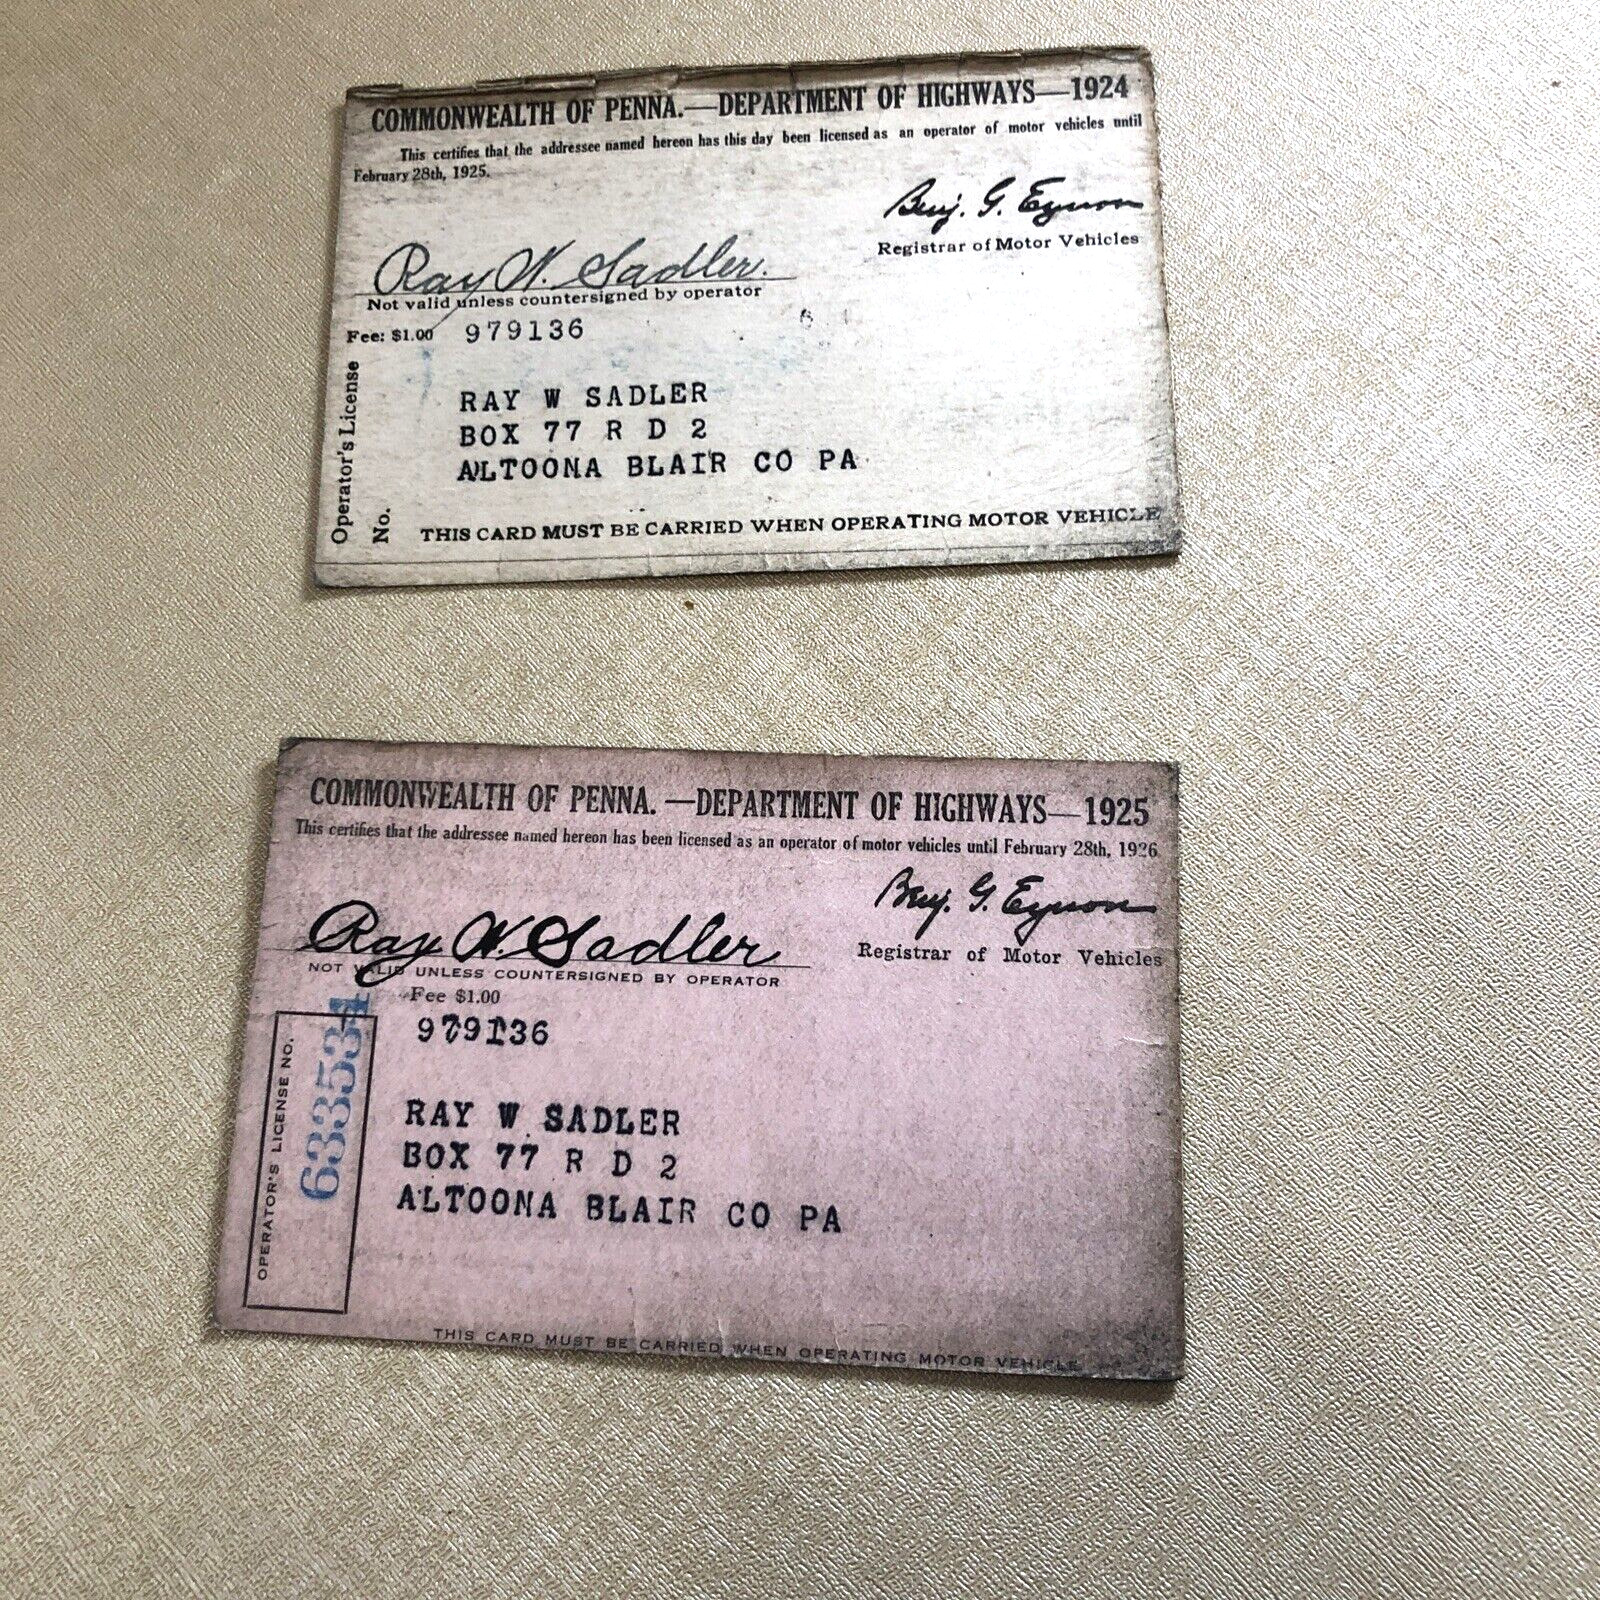 Lot of 2 Commonwealth of Penna Department of Highways 1924 & 1925 License card